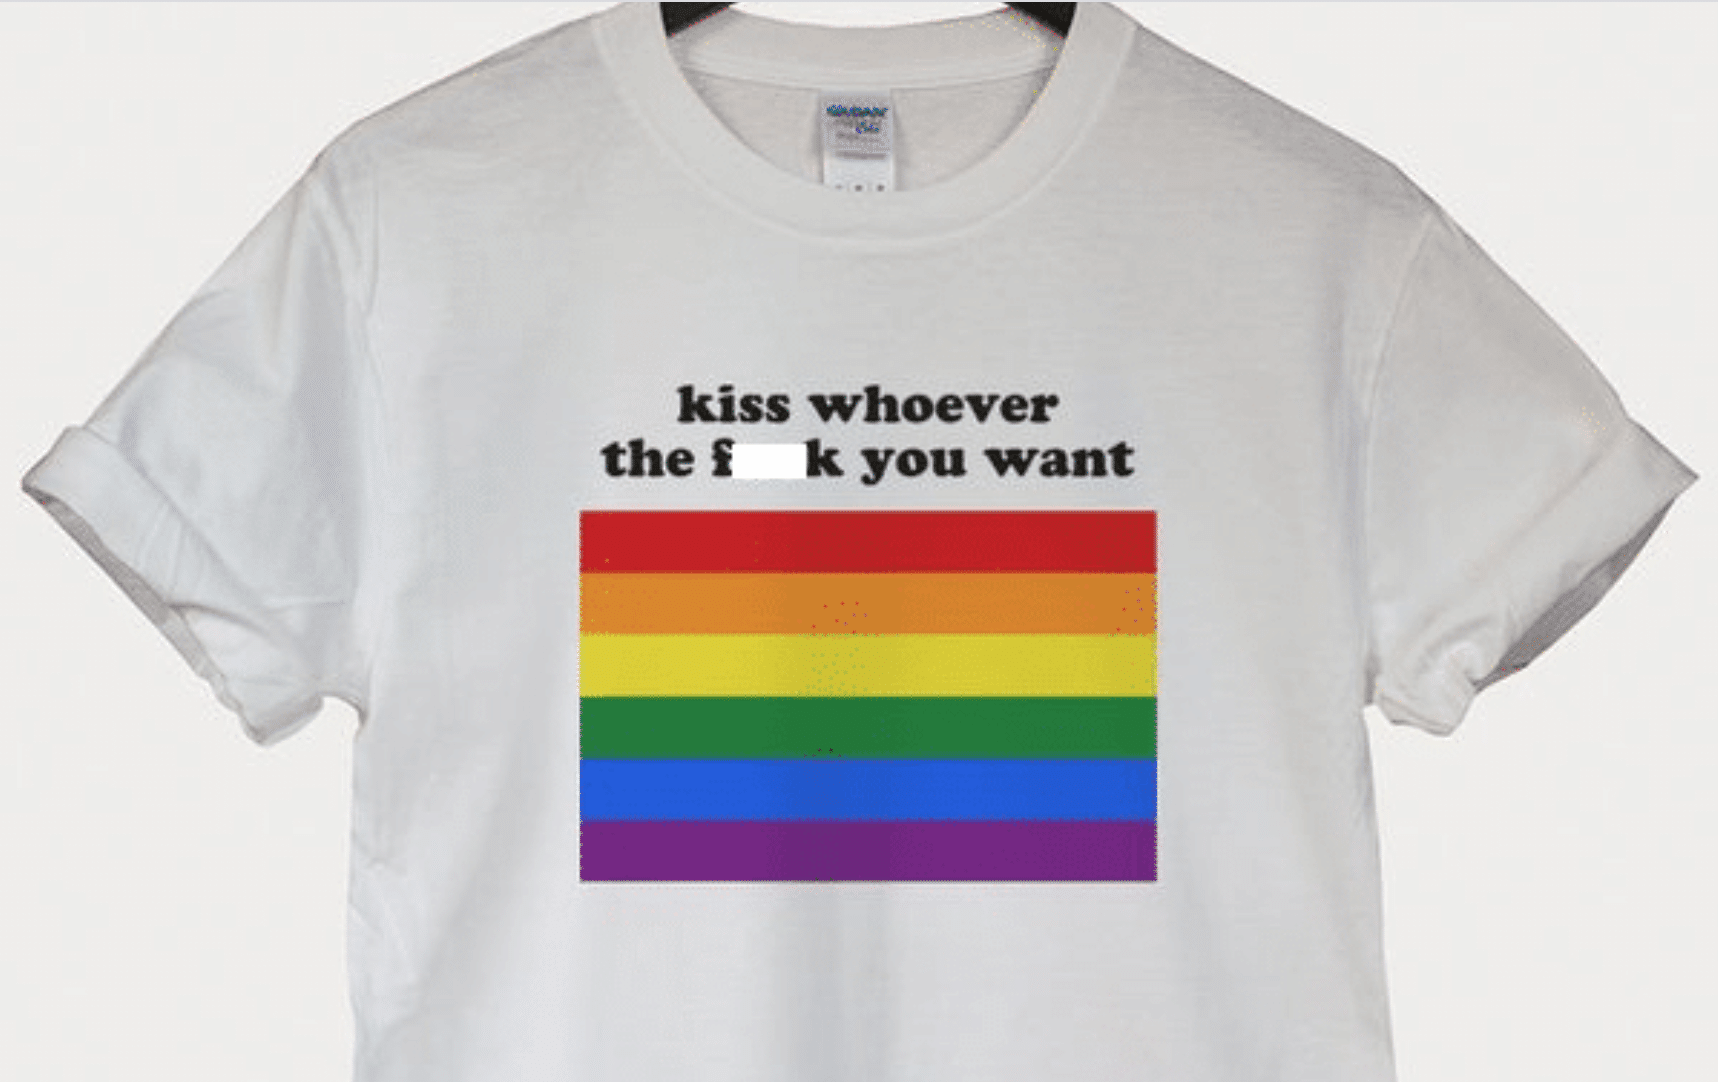 12 unapologetic LGBT slogan tees that scream 'gay rights'